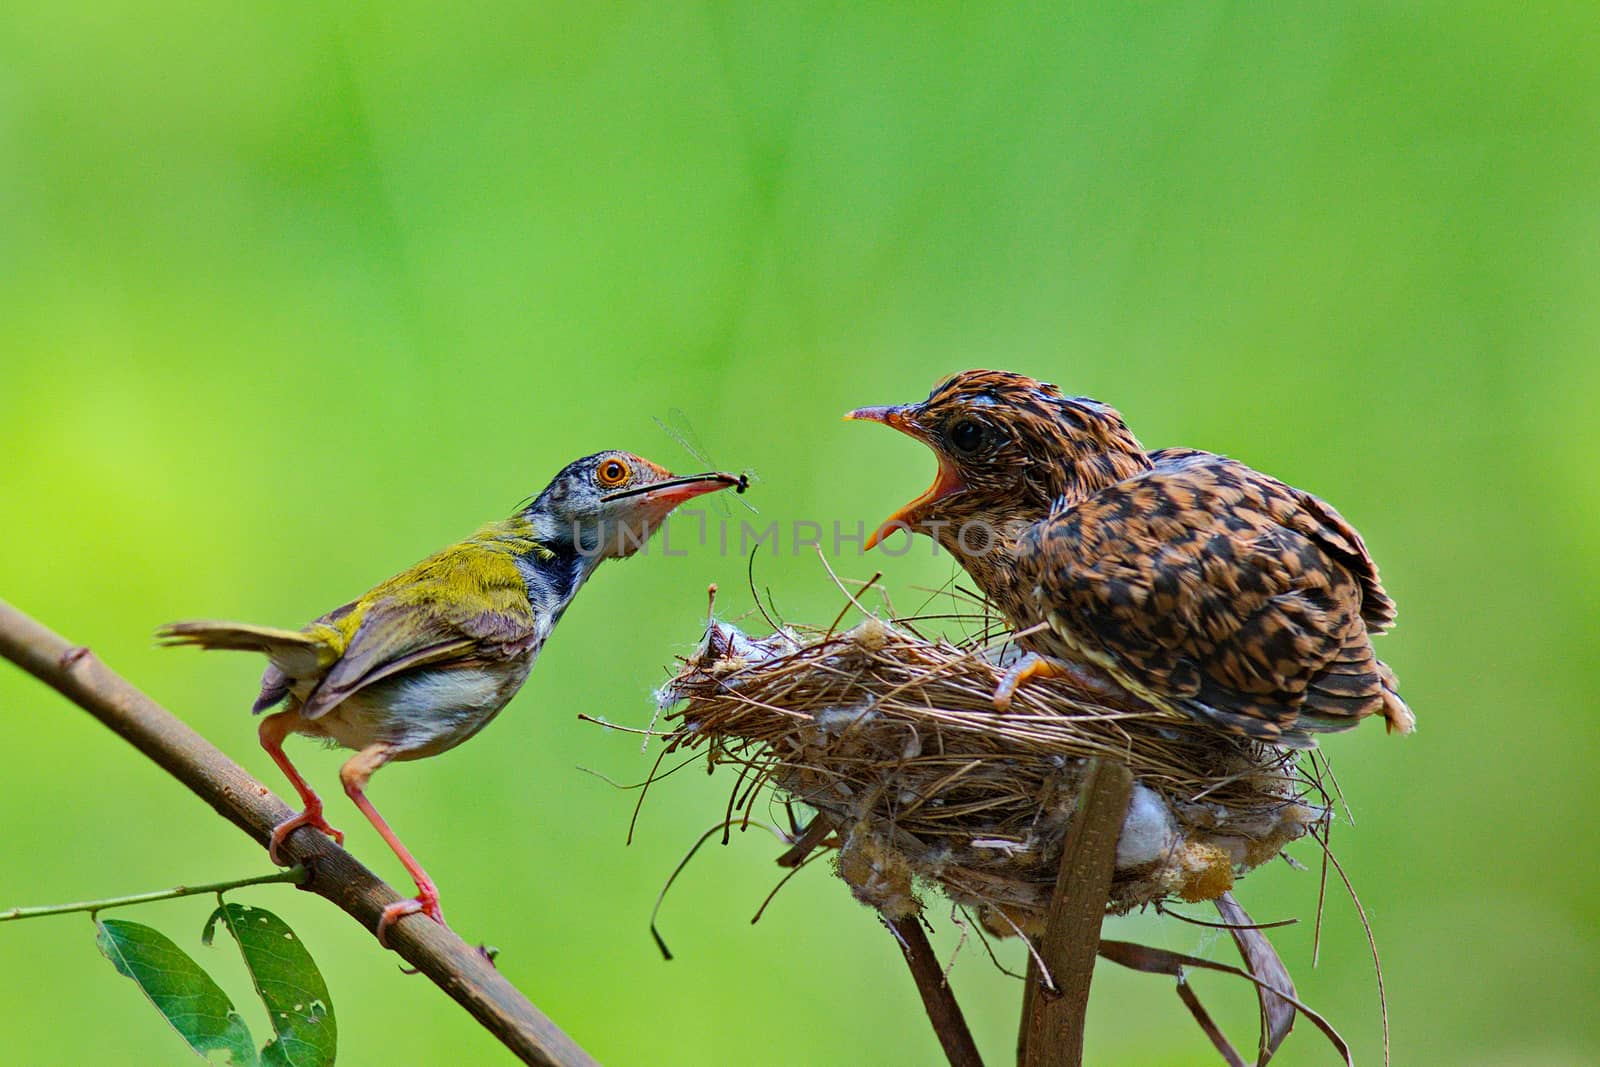 Female Cardinal feeds her baby chicks while standing on their bi by jee1999